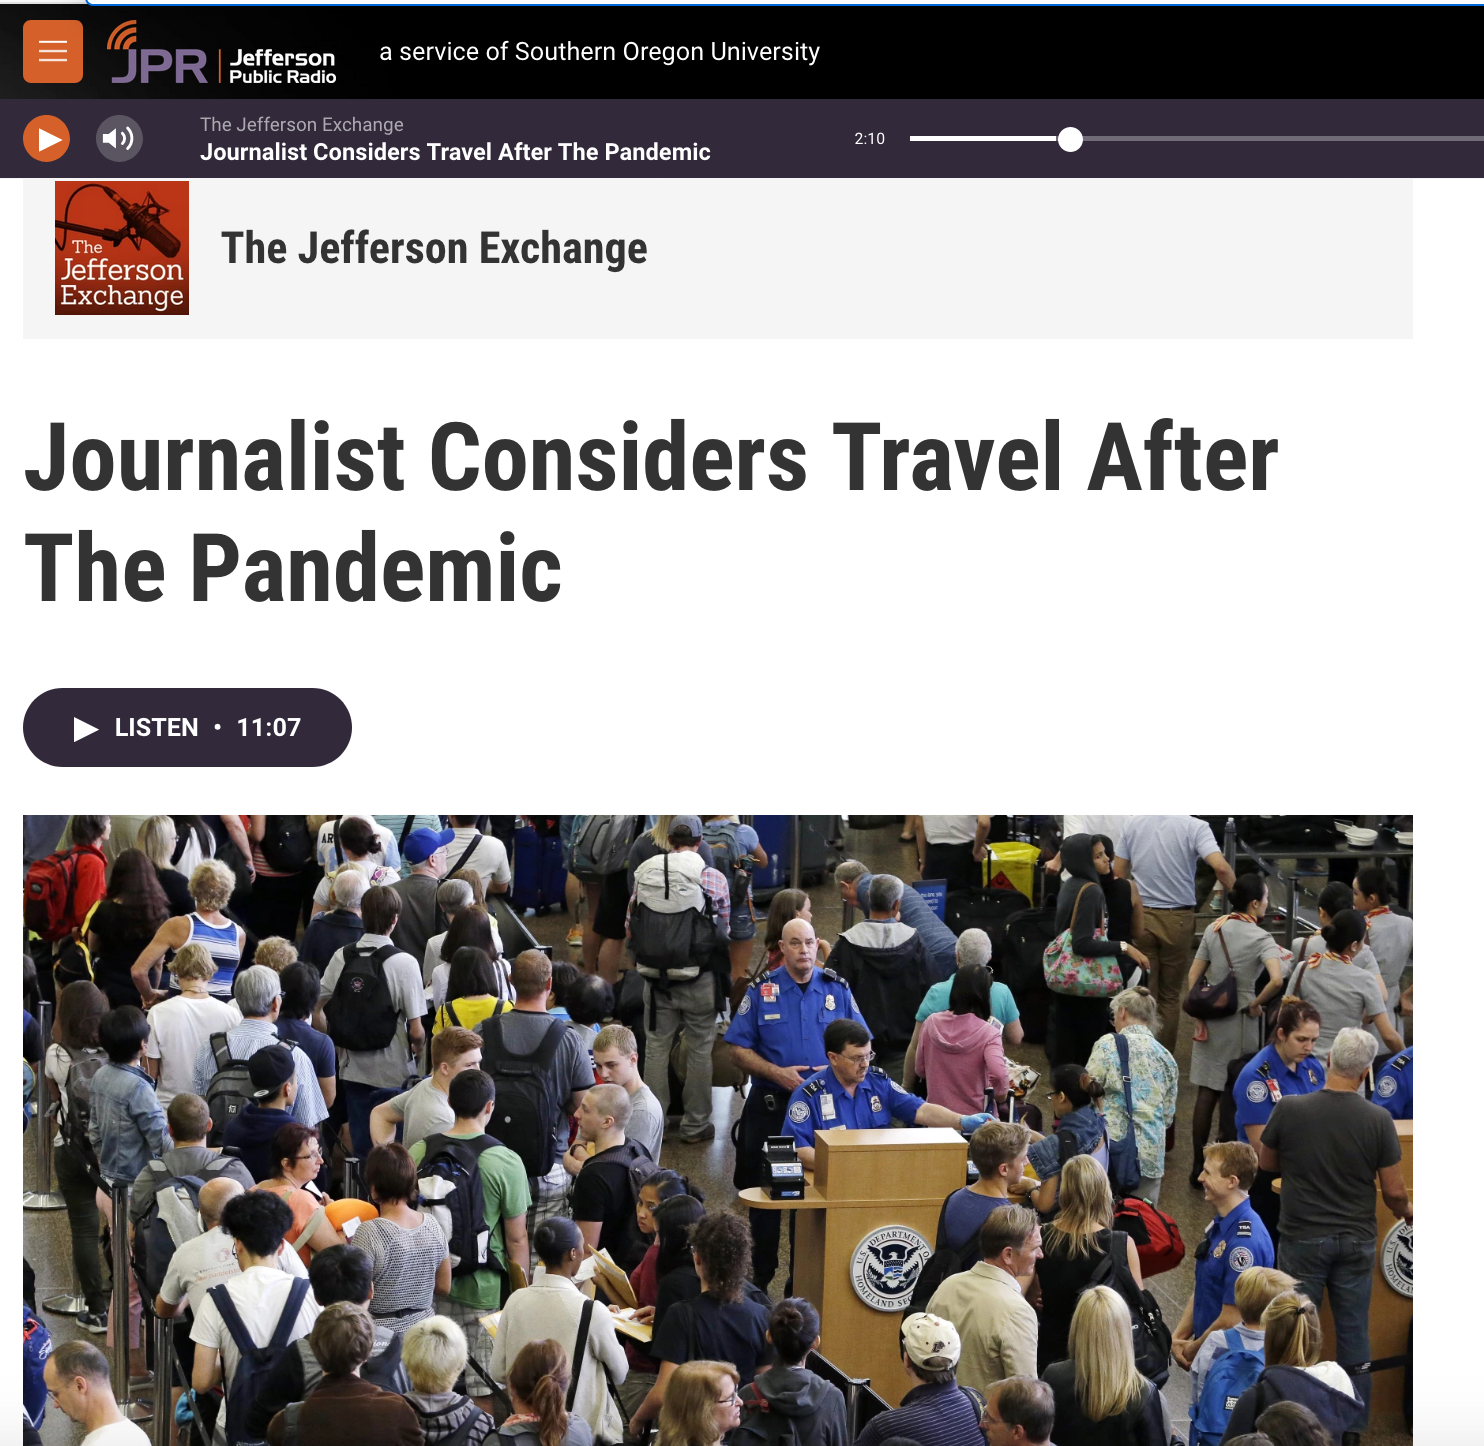 Jefferson Exchange: Journalist considers travel after the pandemic